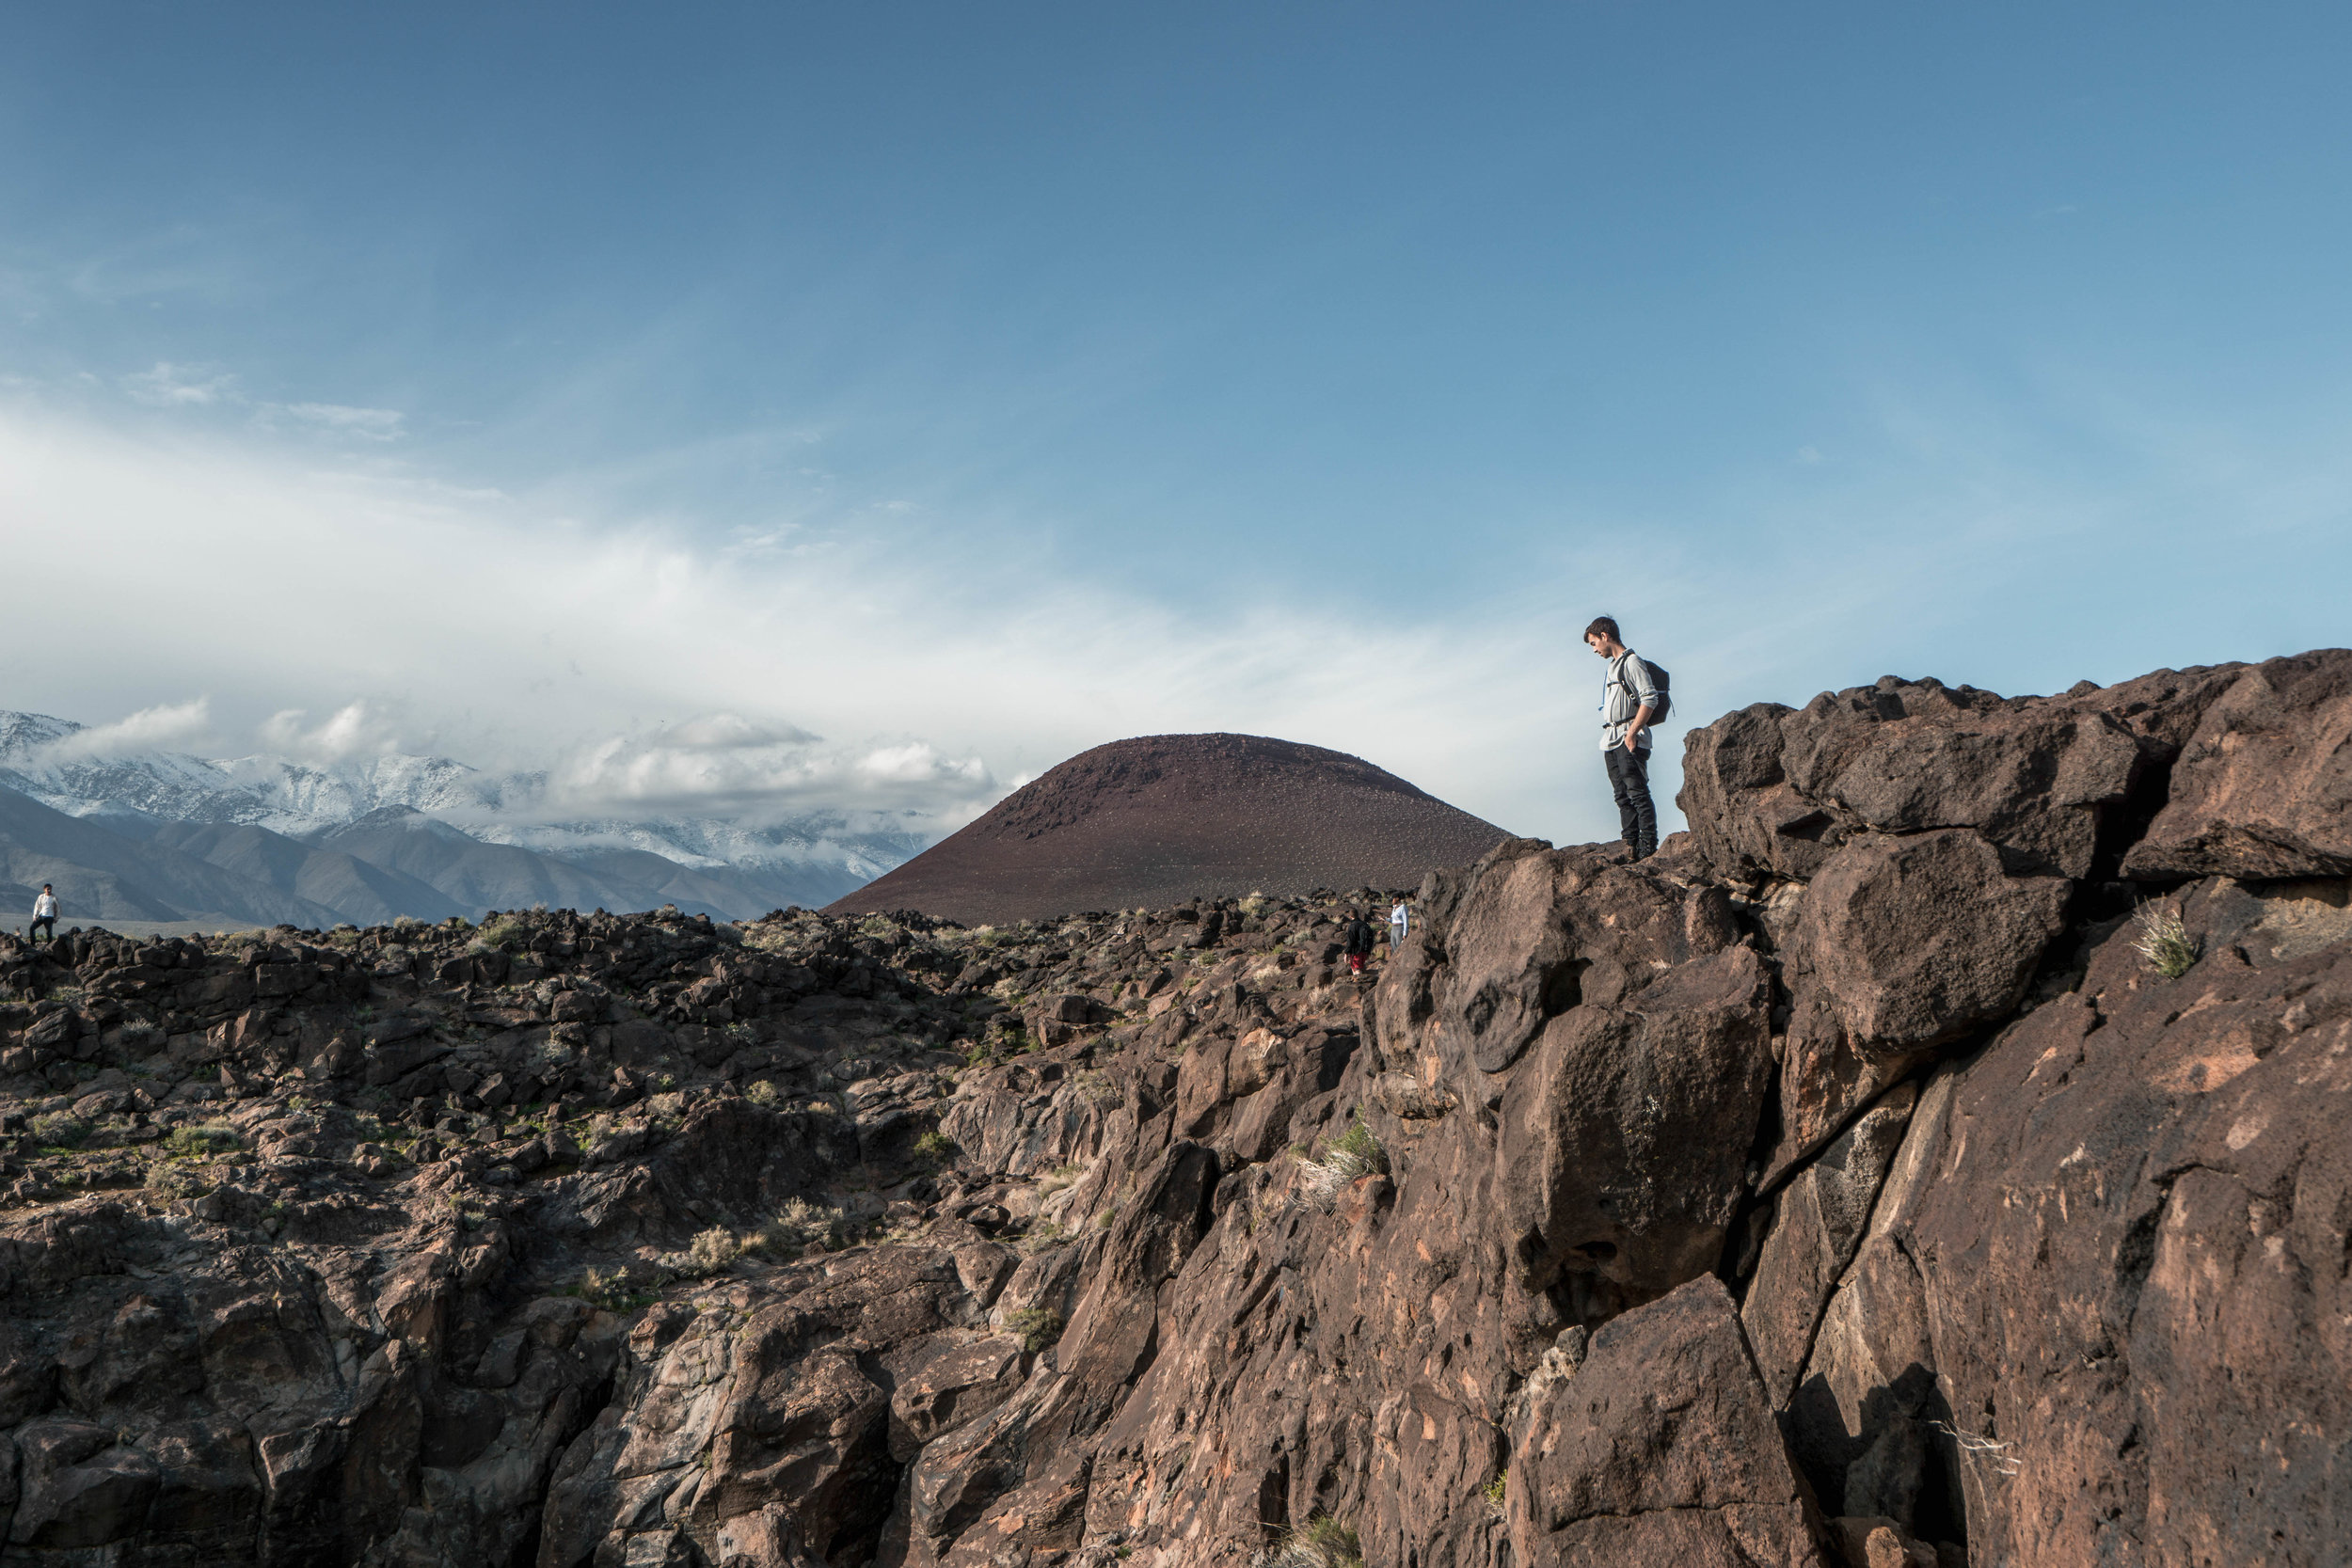 With a giant cinder cone looming behind, we look for a route to descend into the lava canyon.